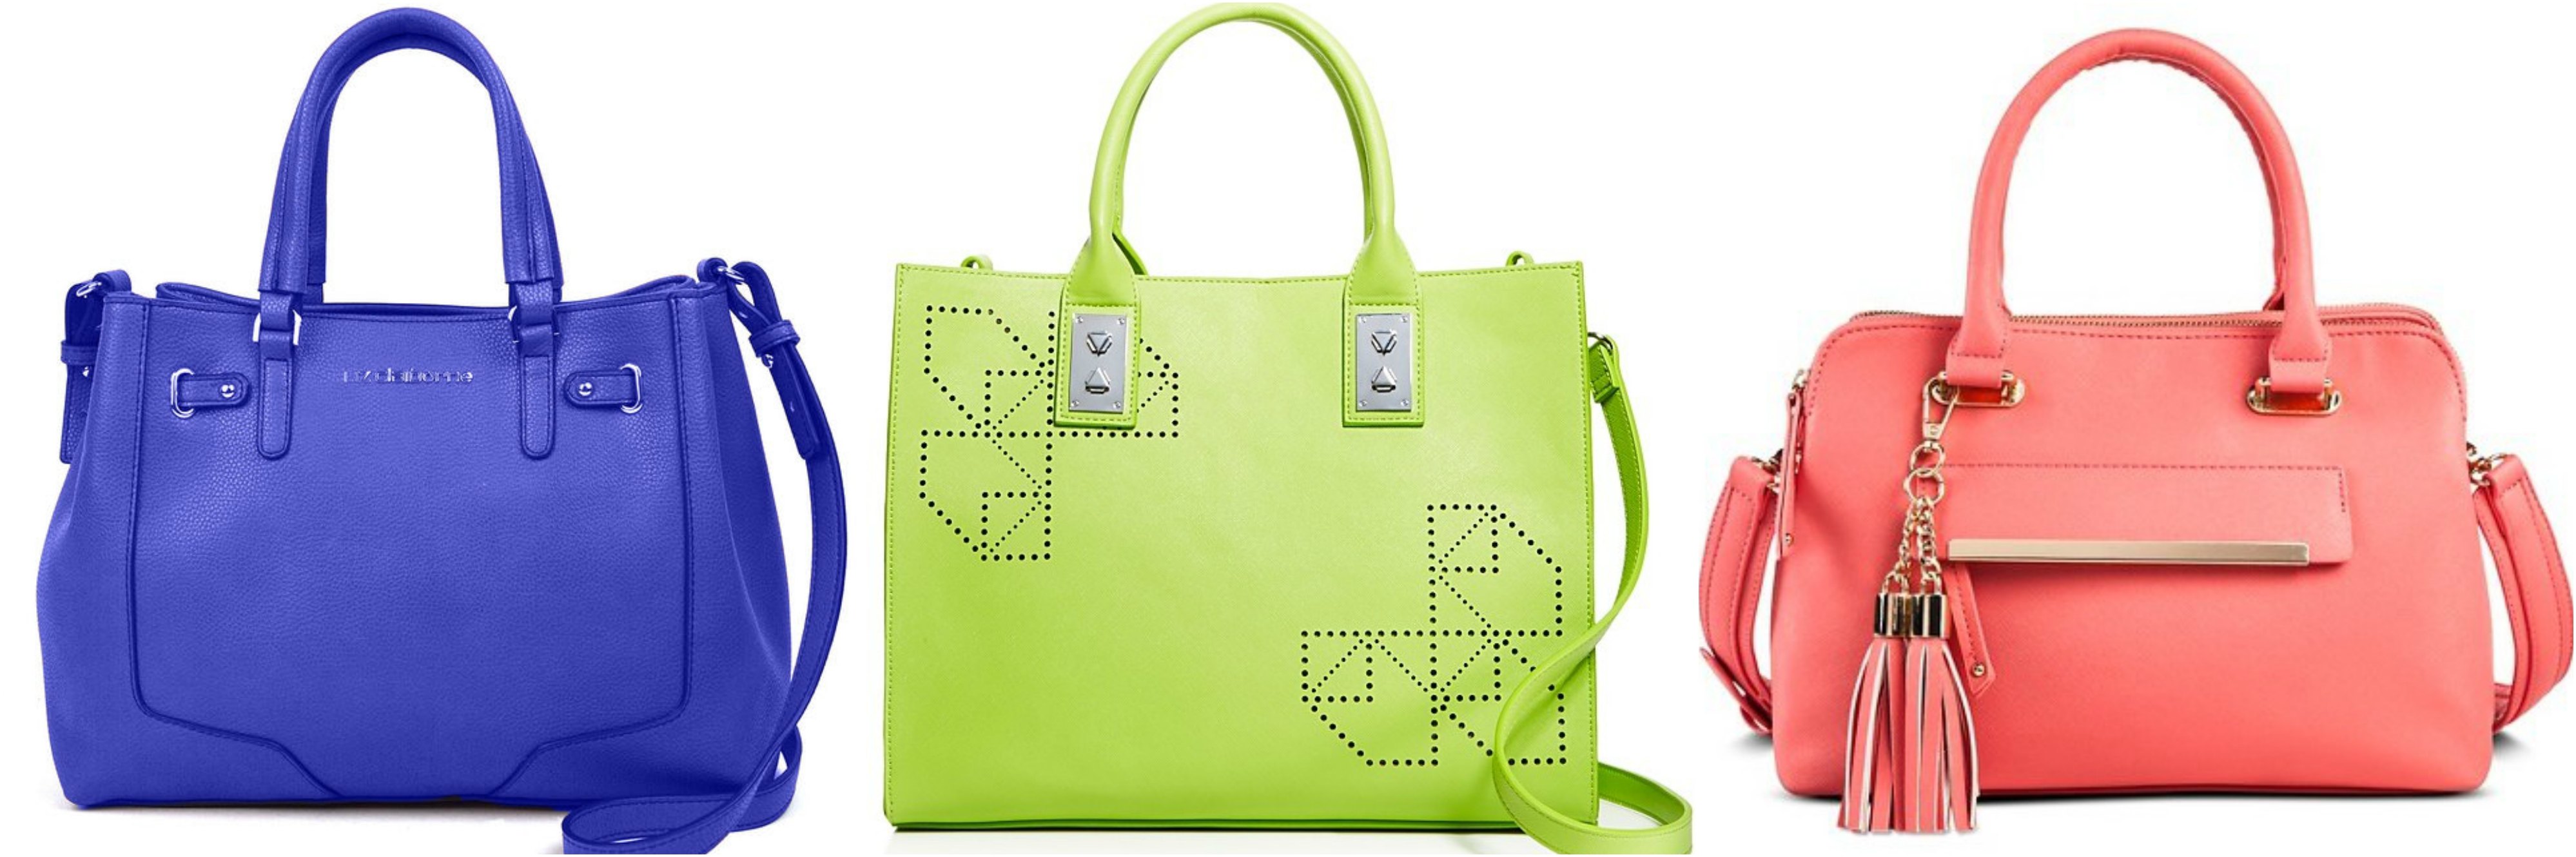 Add Color with Colorful Handbags!